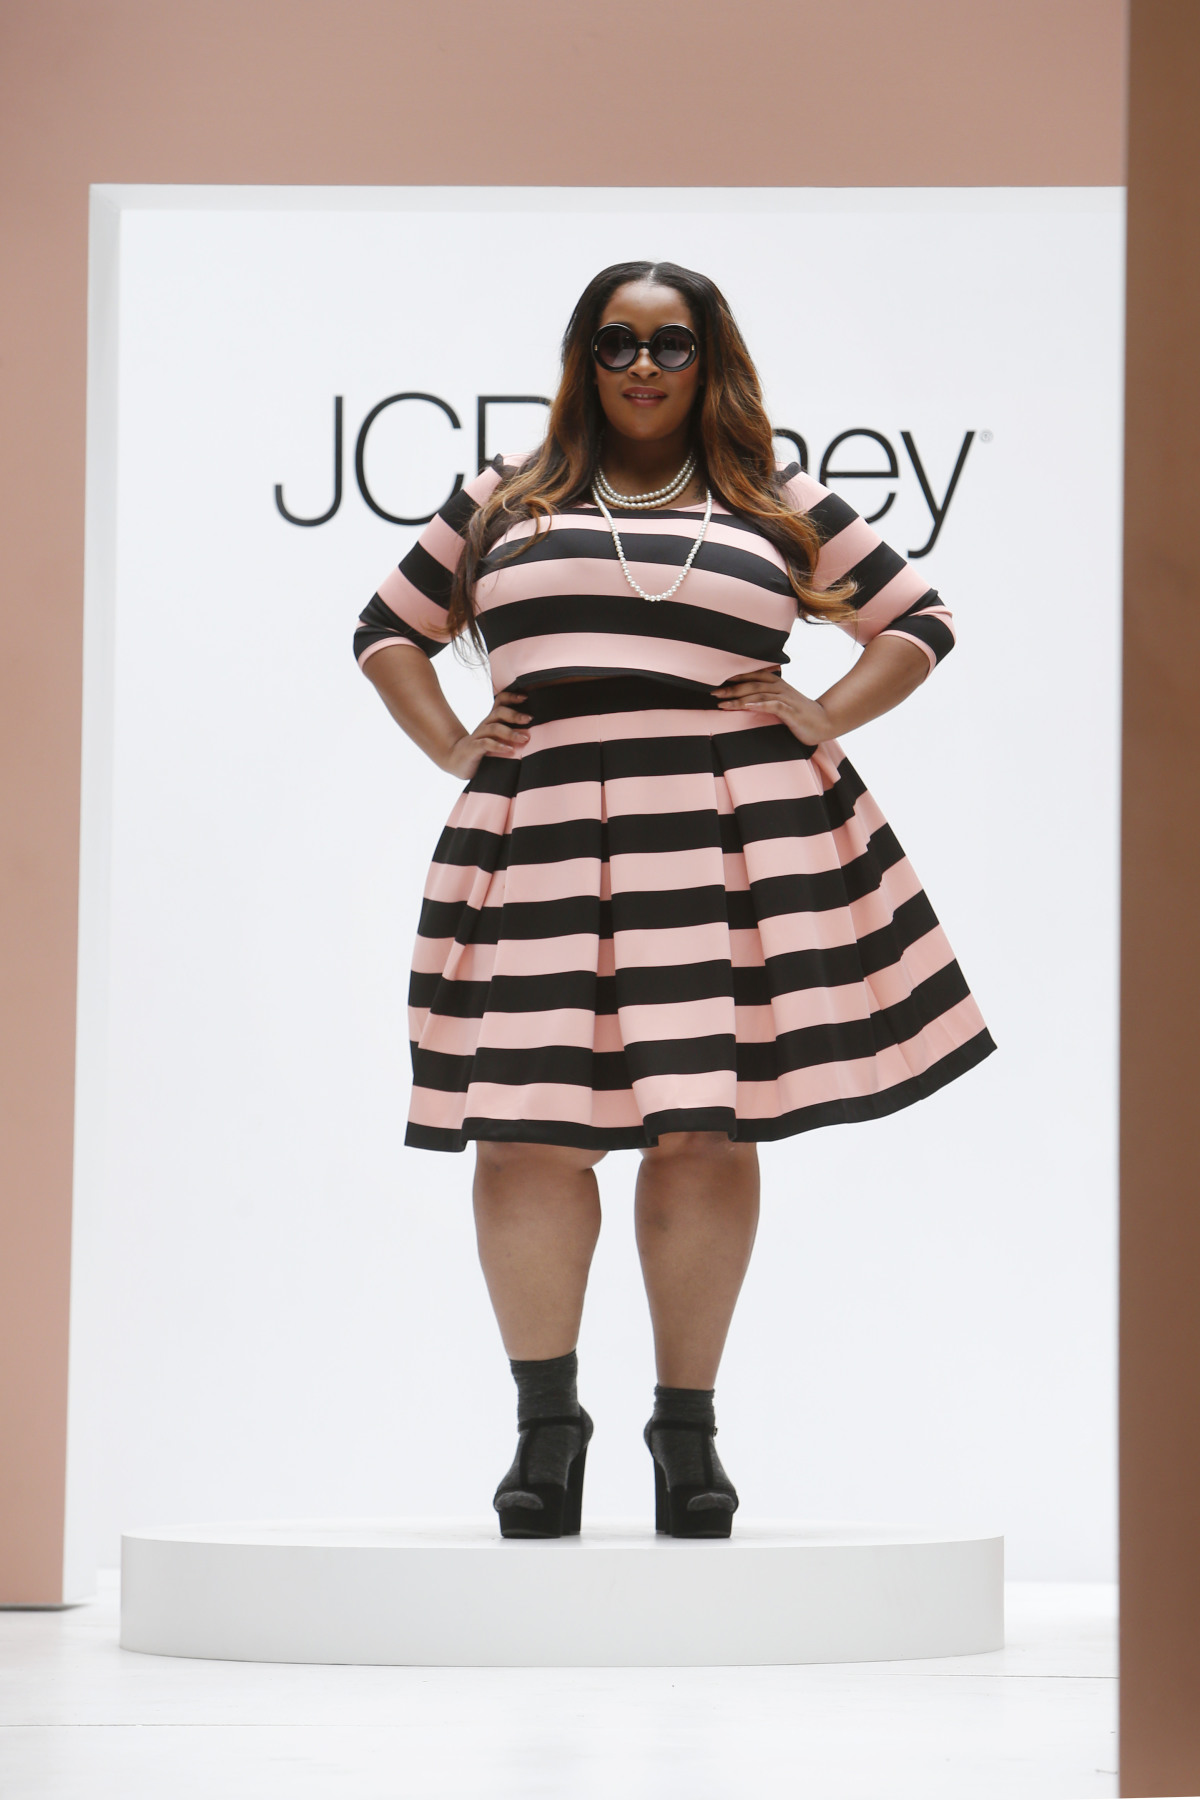 Ashley Nell Tipton for Boutique+ by JCPenney - This is Meagan Kerr